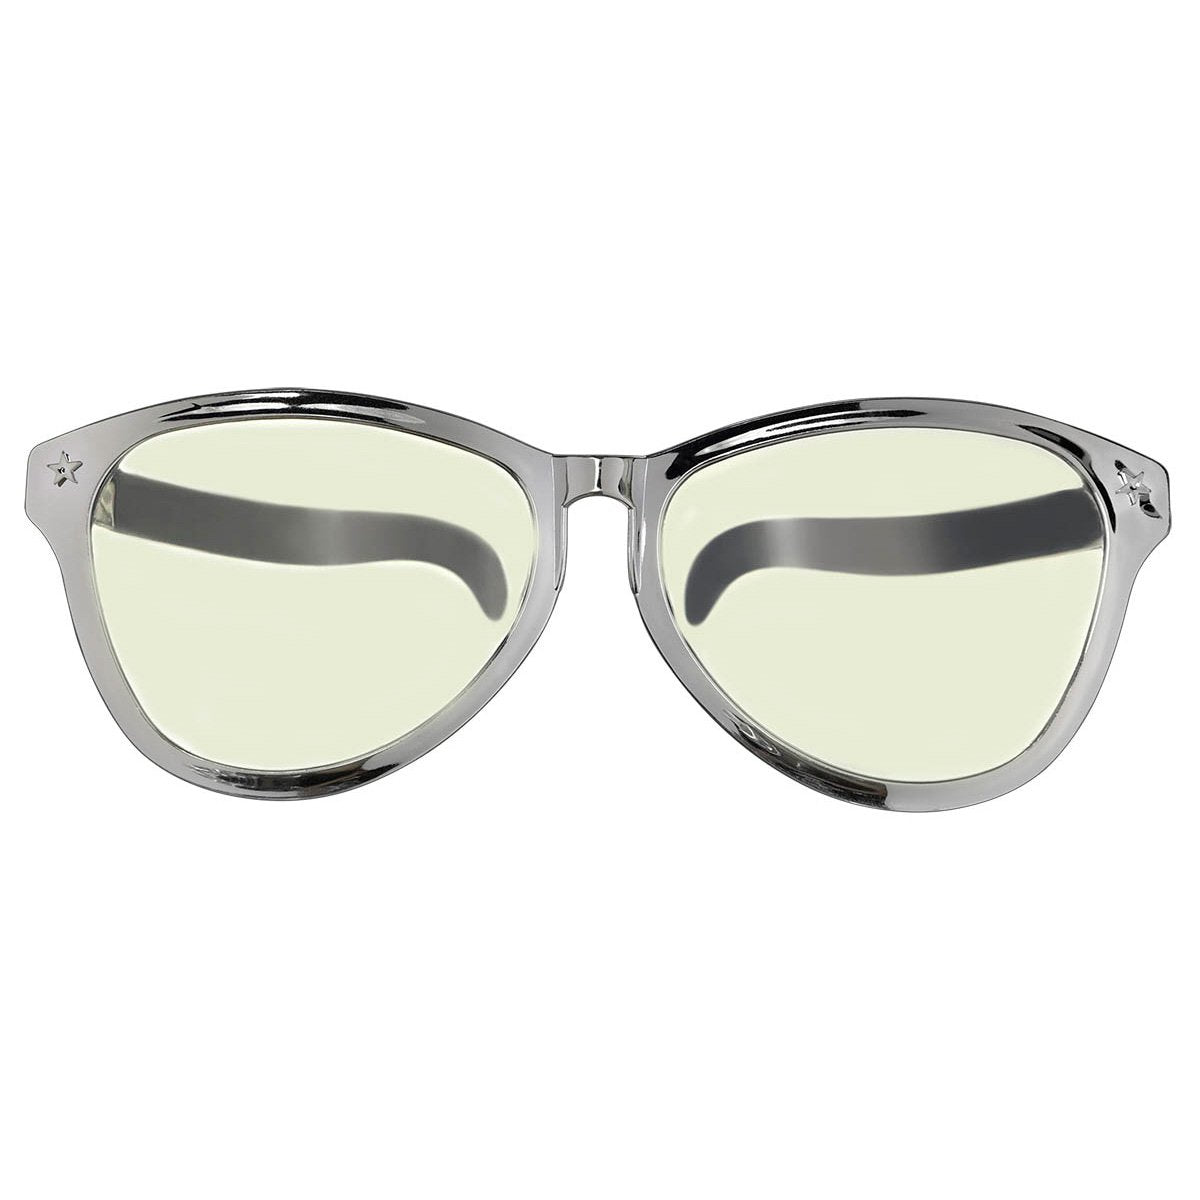 Silver Jumbo Glasses Costumes & Apparel - Party Centre - Party Centre